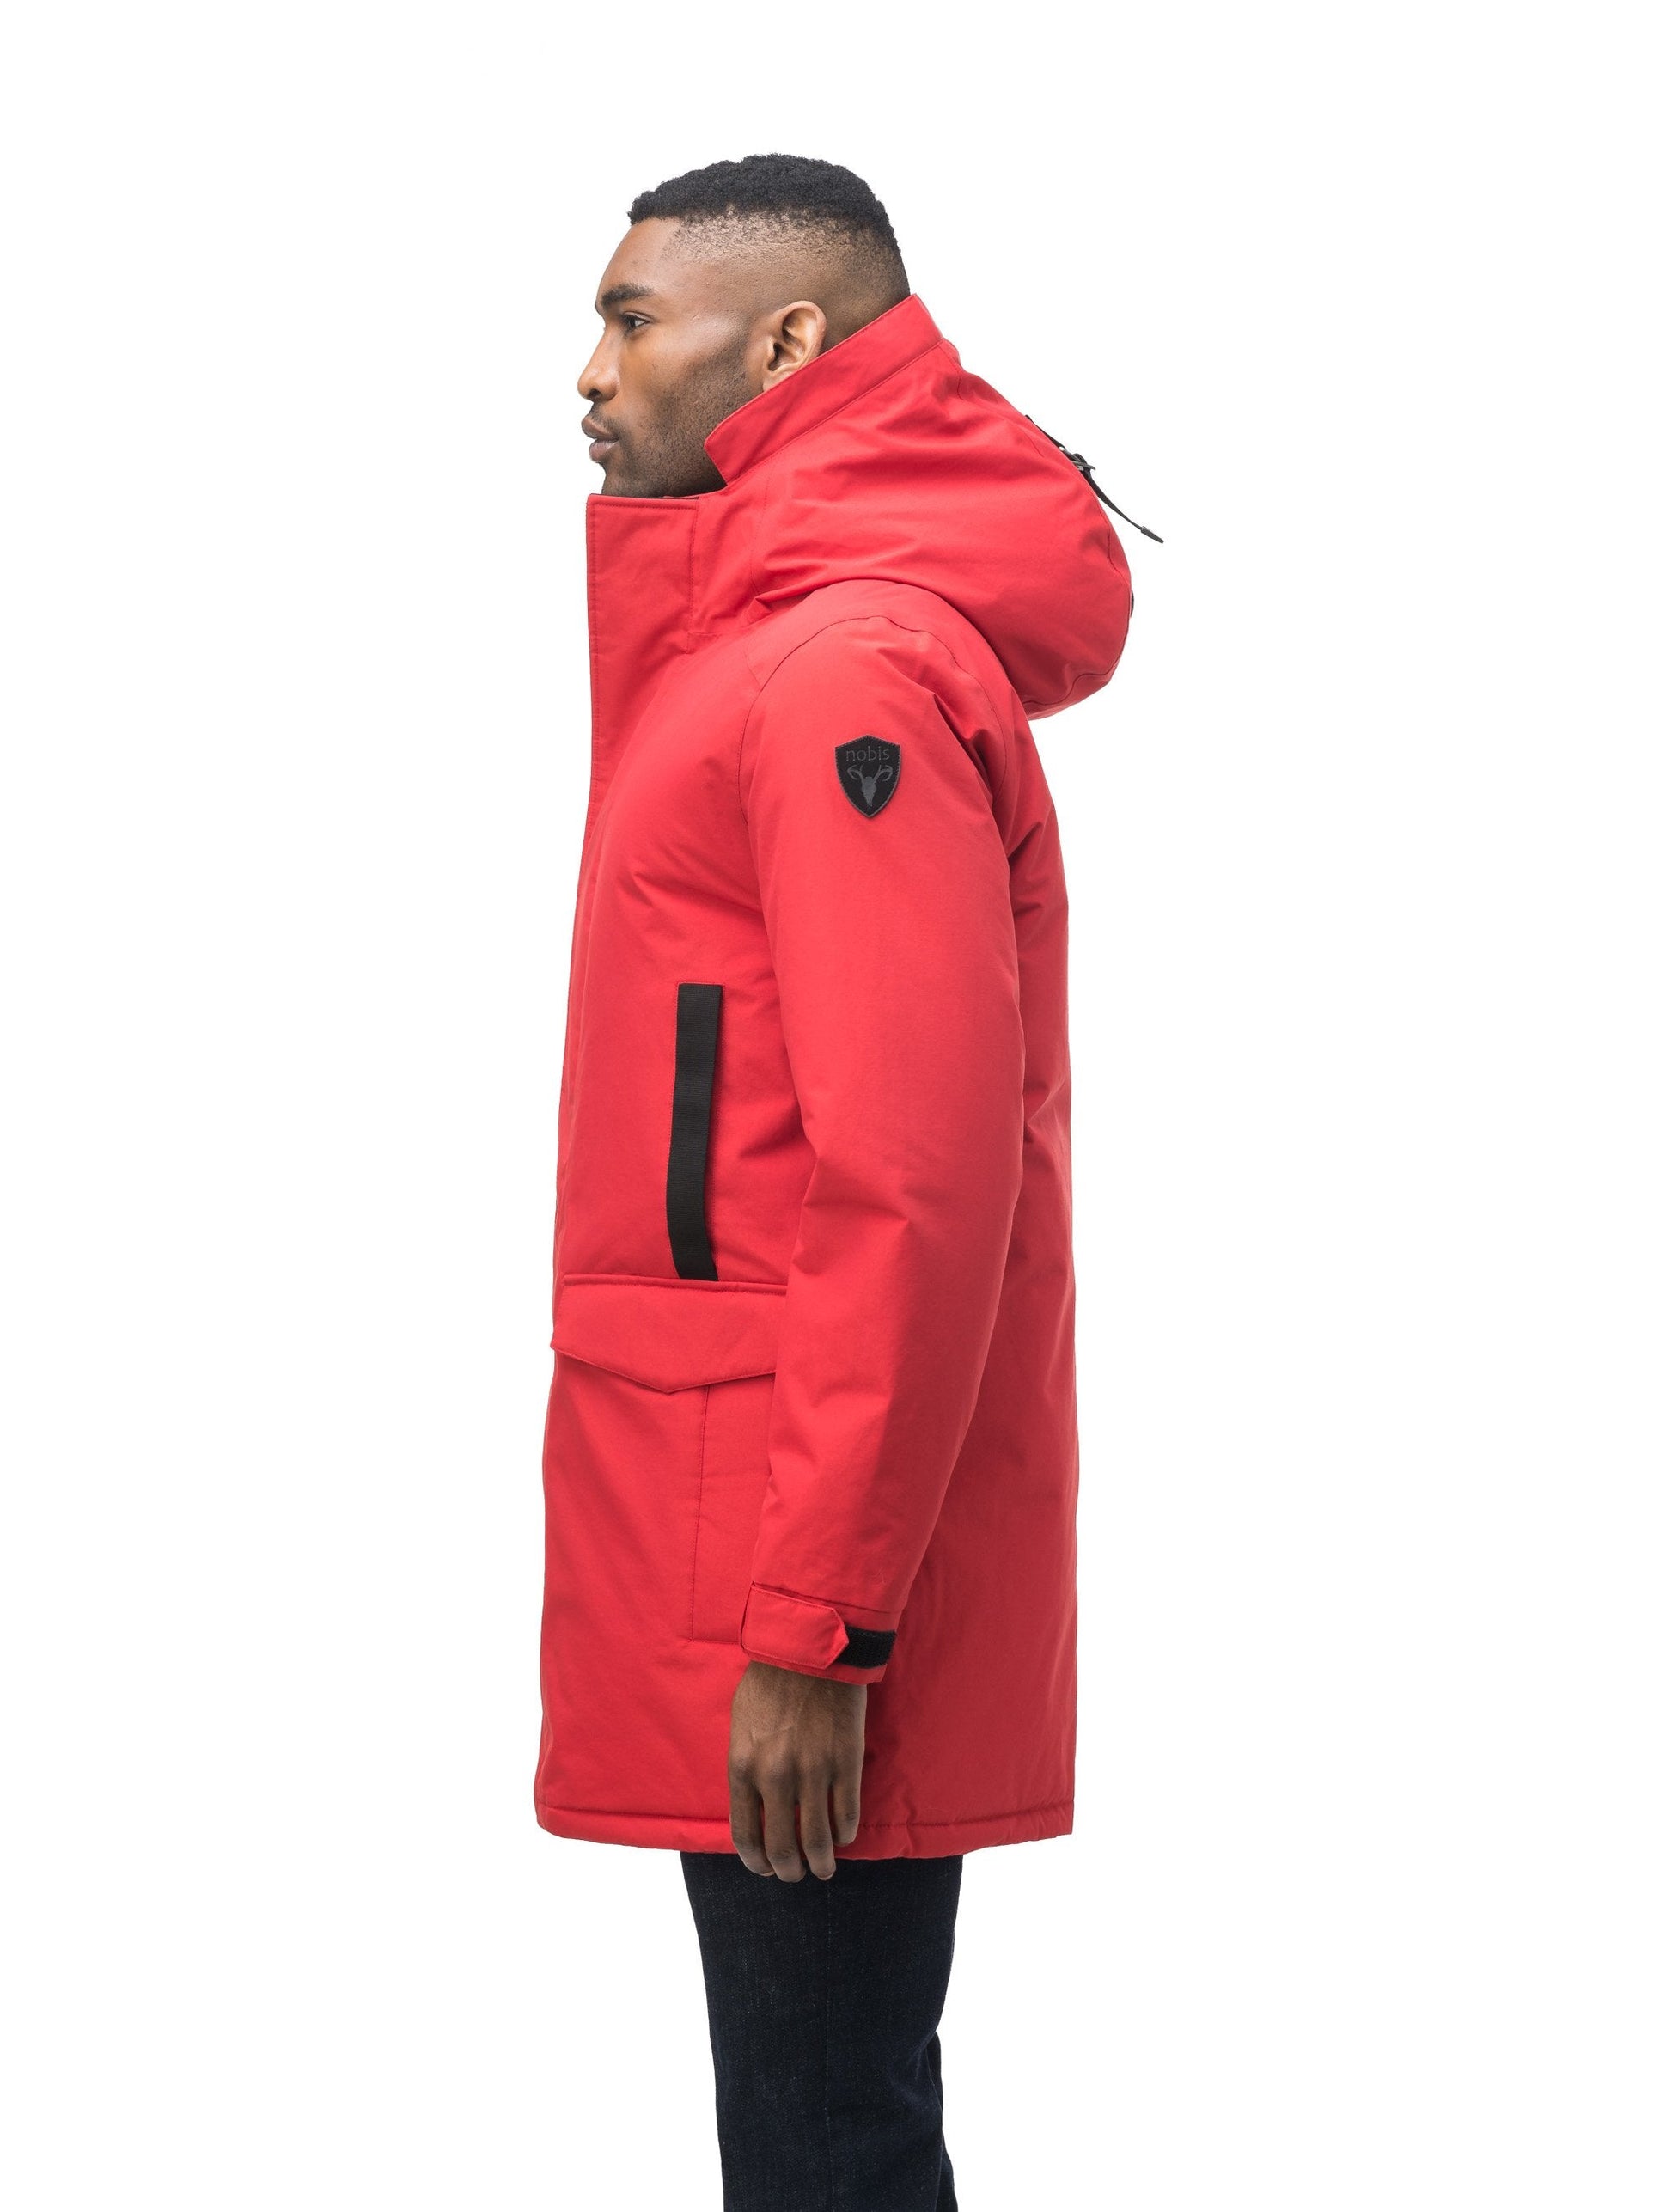 Lightweight men's parka with duck down fill and removable fur trim around the hood in Vermillion